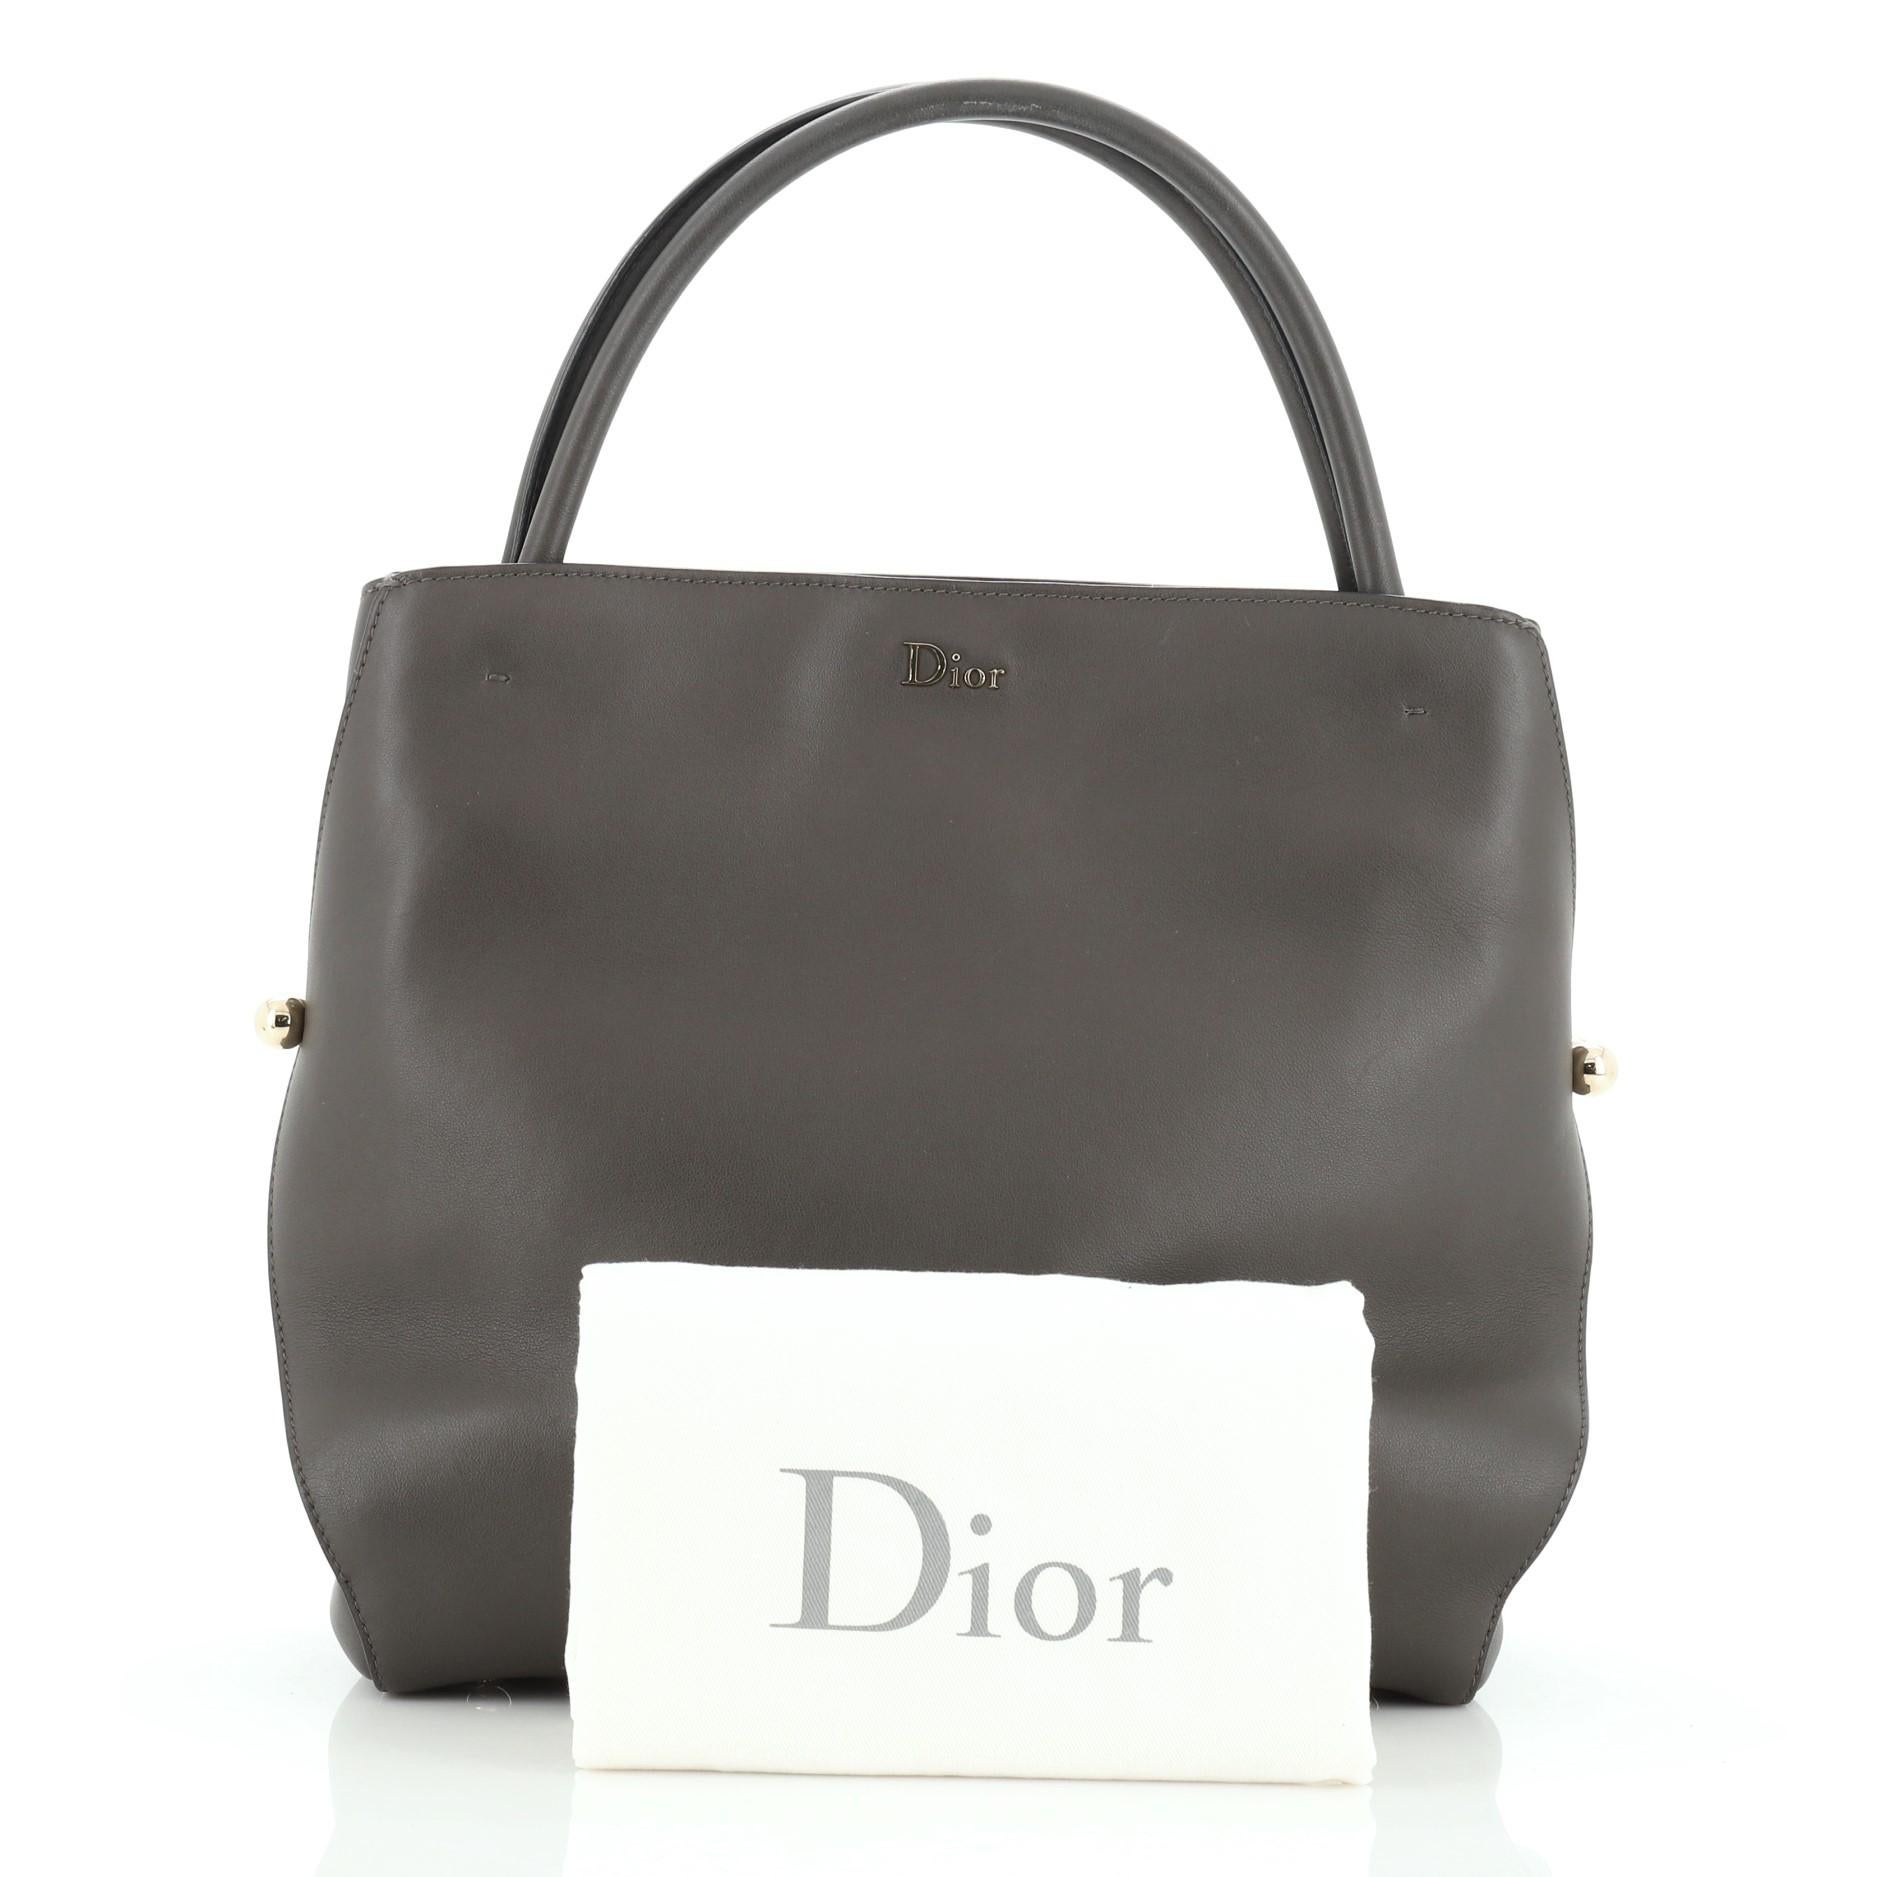 This Christian Dior Top Handle Bar Tote Calfskin Medium, crafted from gray leather, features dual top handles and gold-tone hardware. It opens to a gray leather interior. 

Estimated Retail Price: $4,350
Condition: Very good. Minor scuffs on